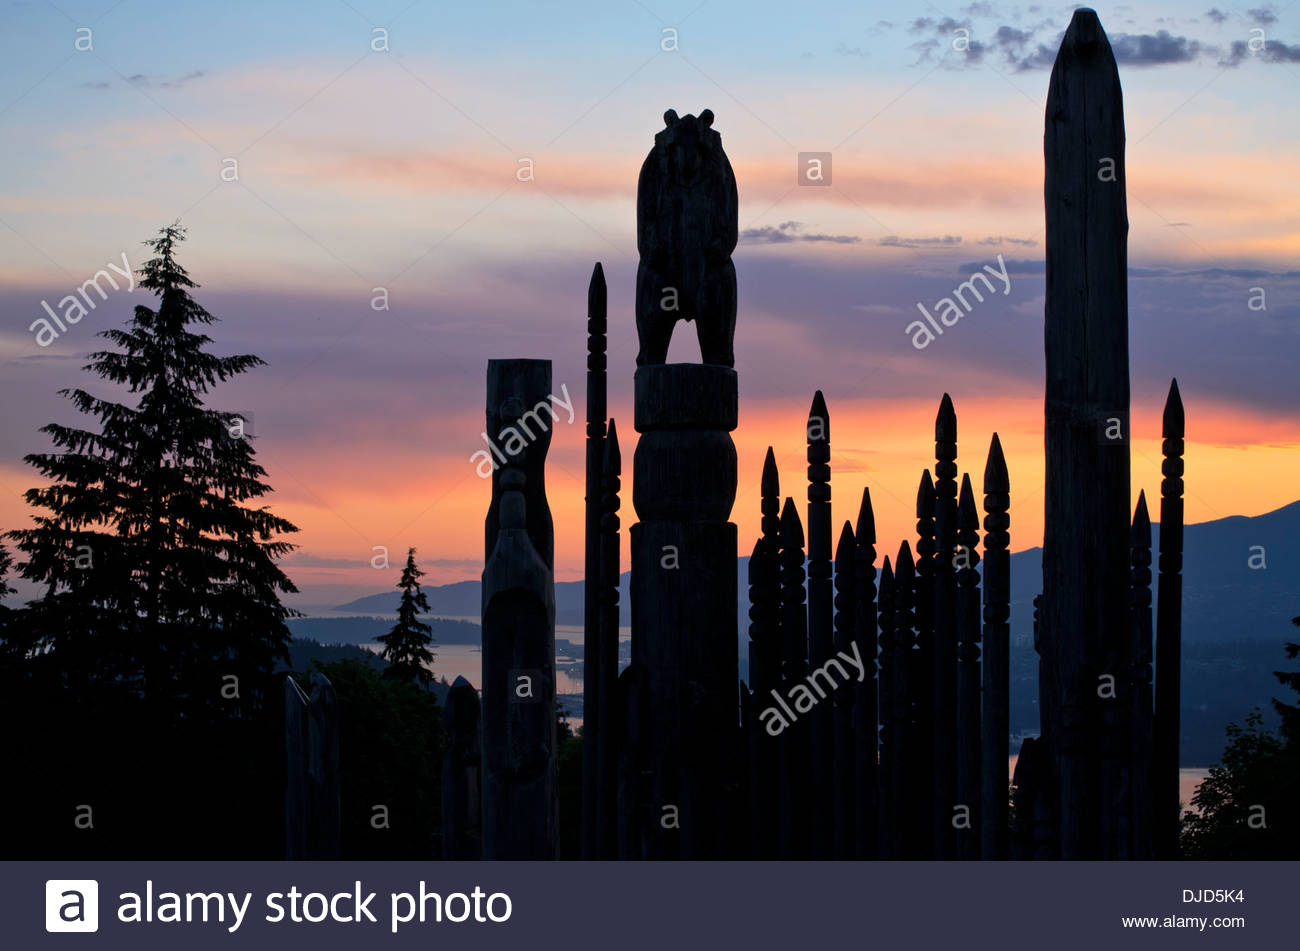 Silhouettes_of_Japanese_totem_poles_incl